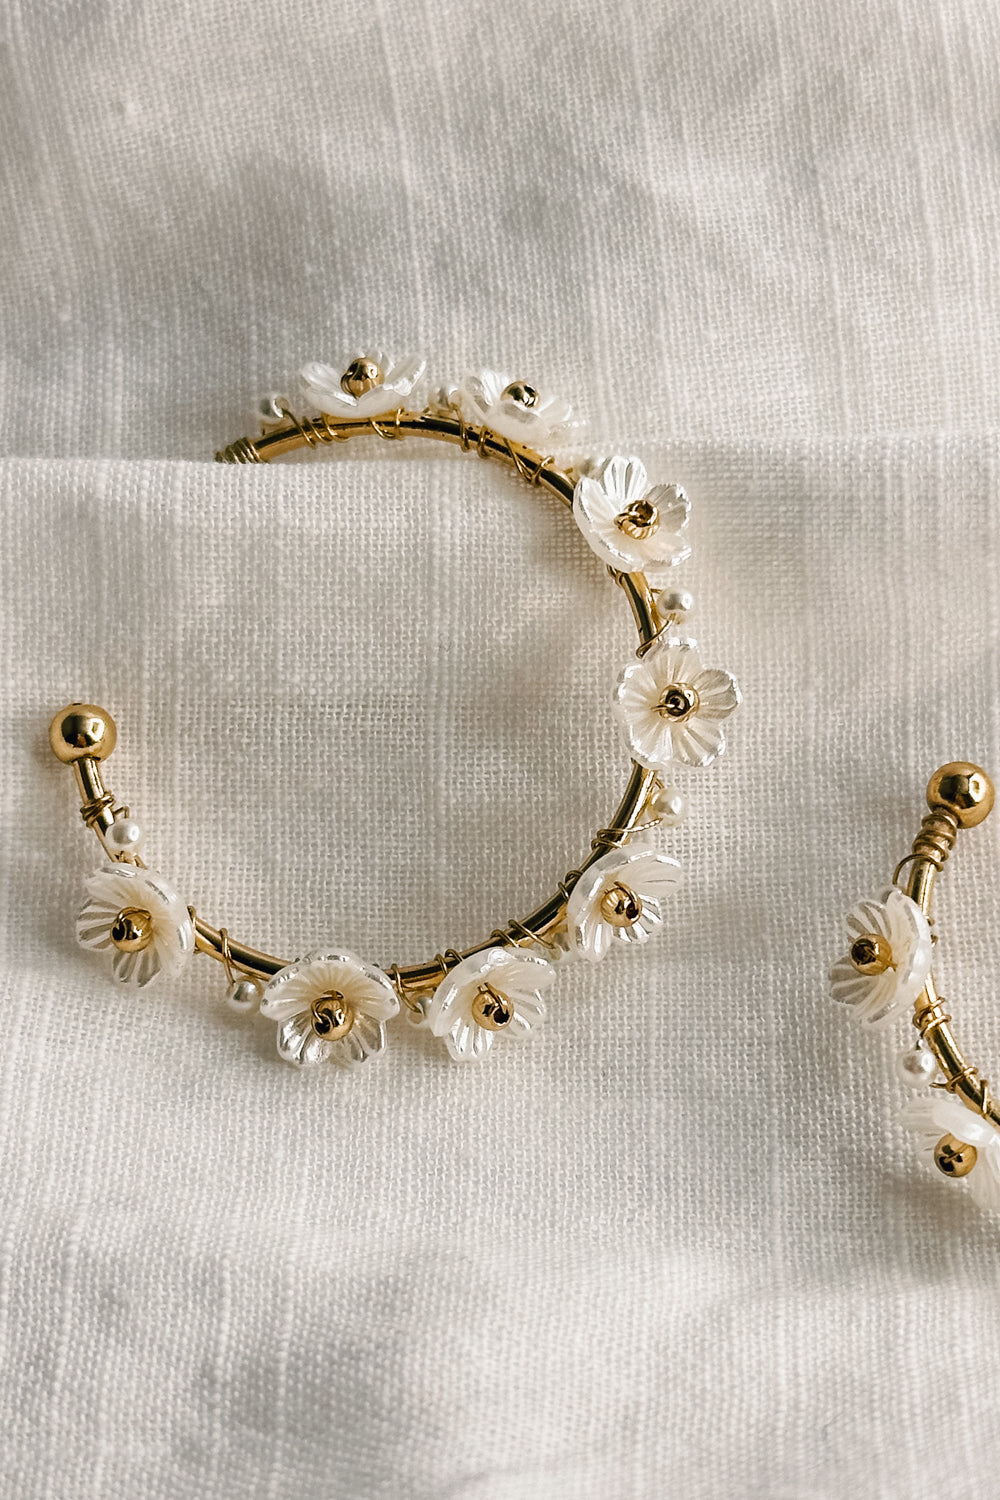 Close up view of the Jessie White and Gold Flower Hoop Earring which features medium size open gold hoops, white flower details and back clasp closure